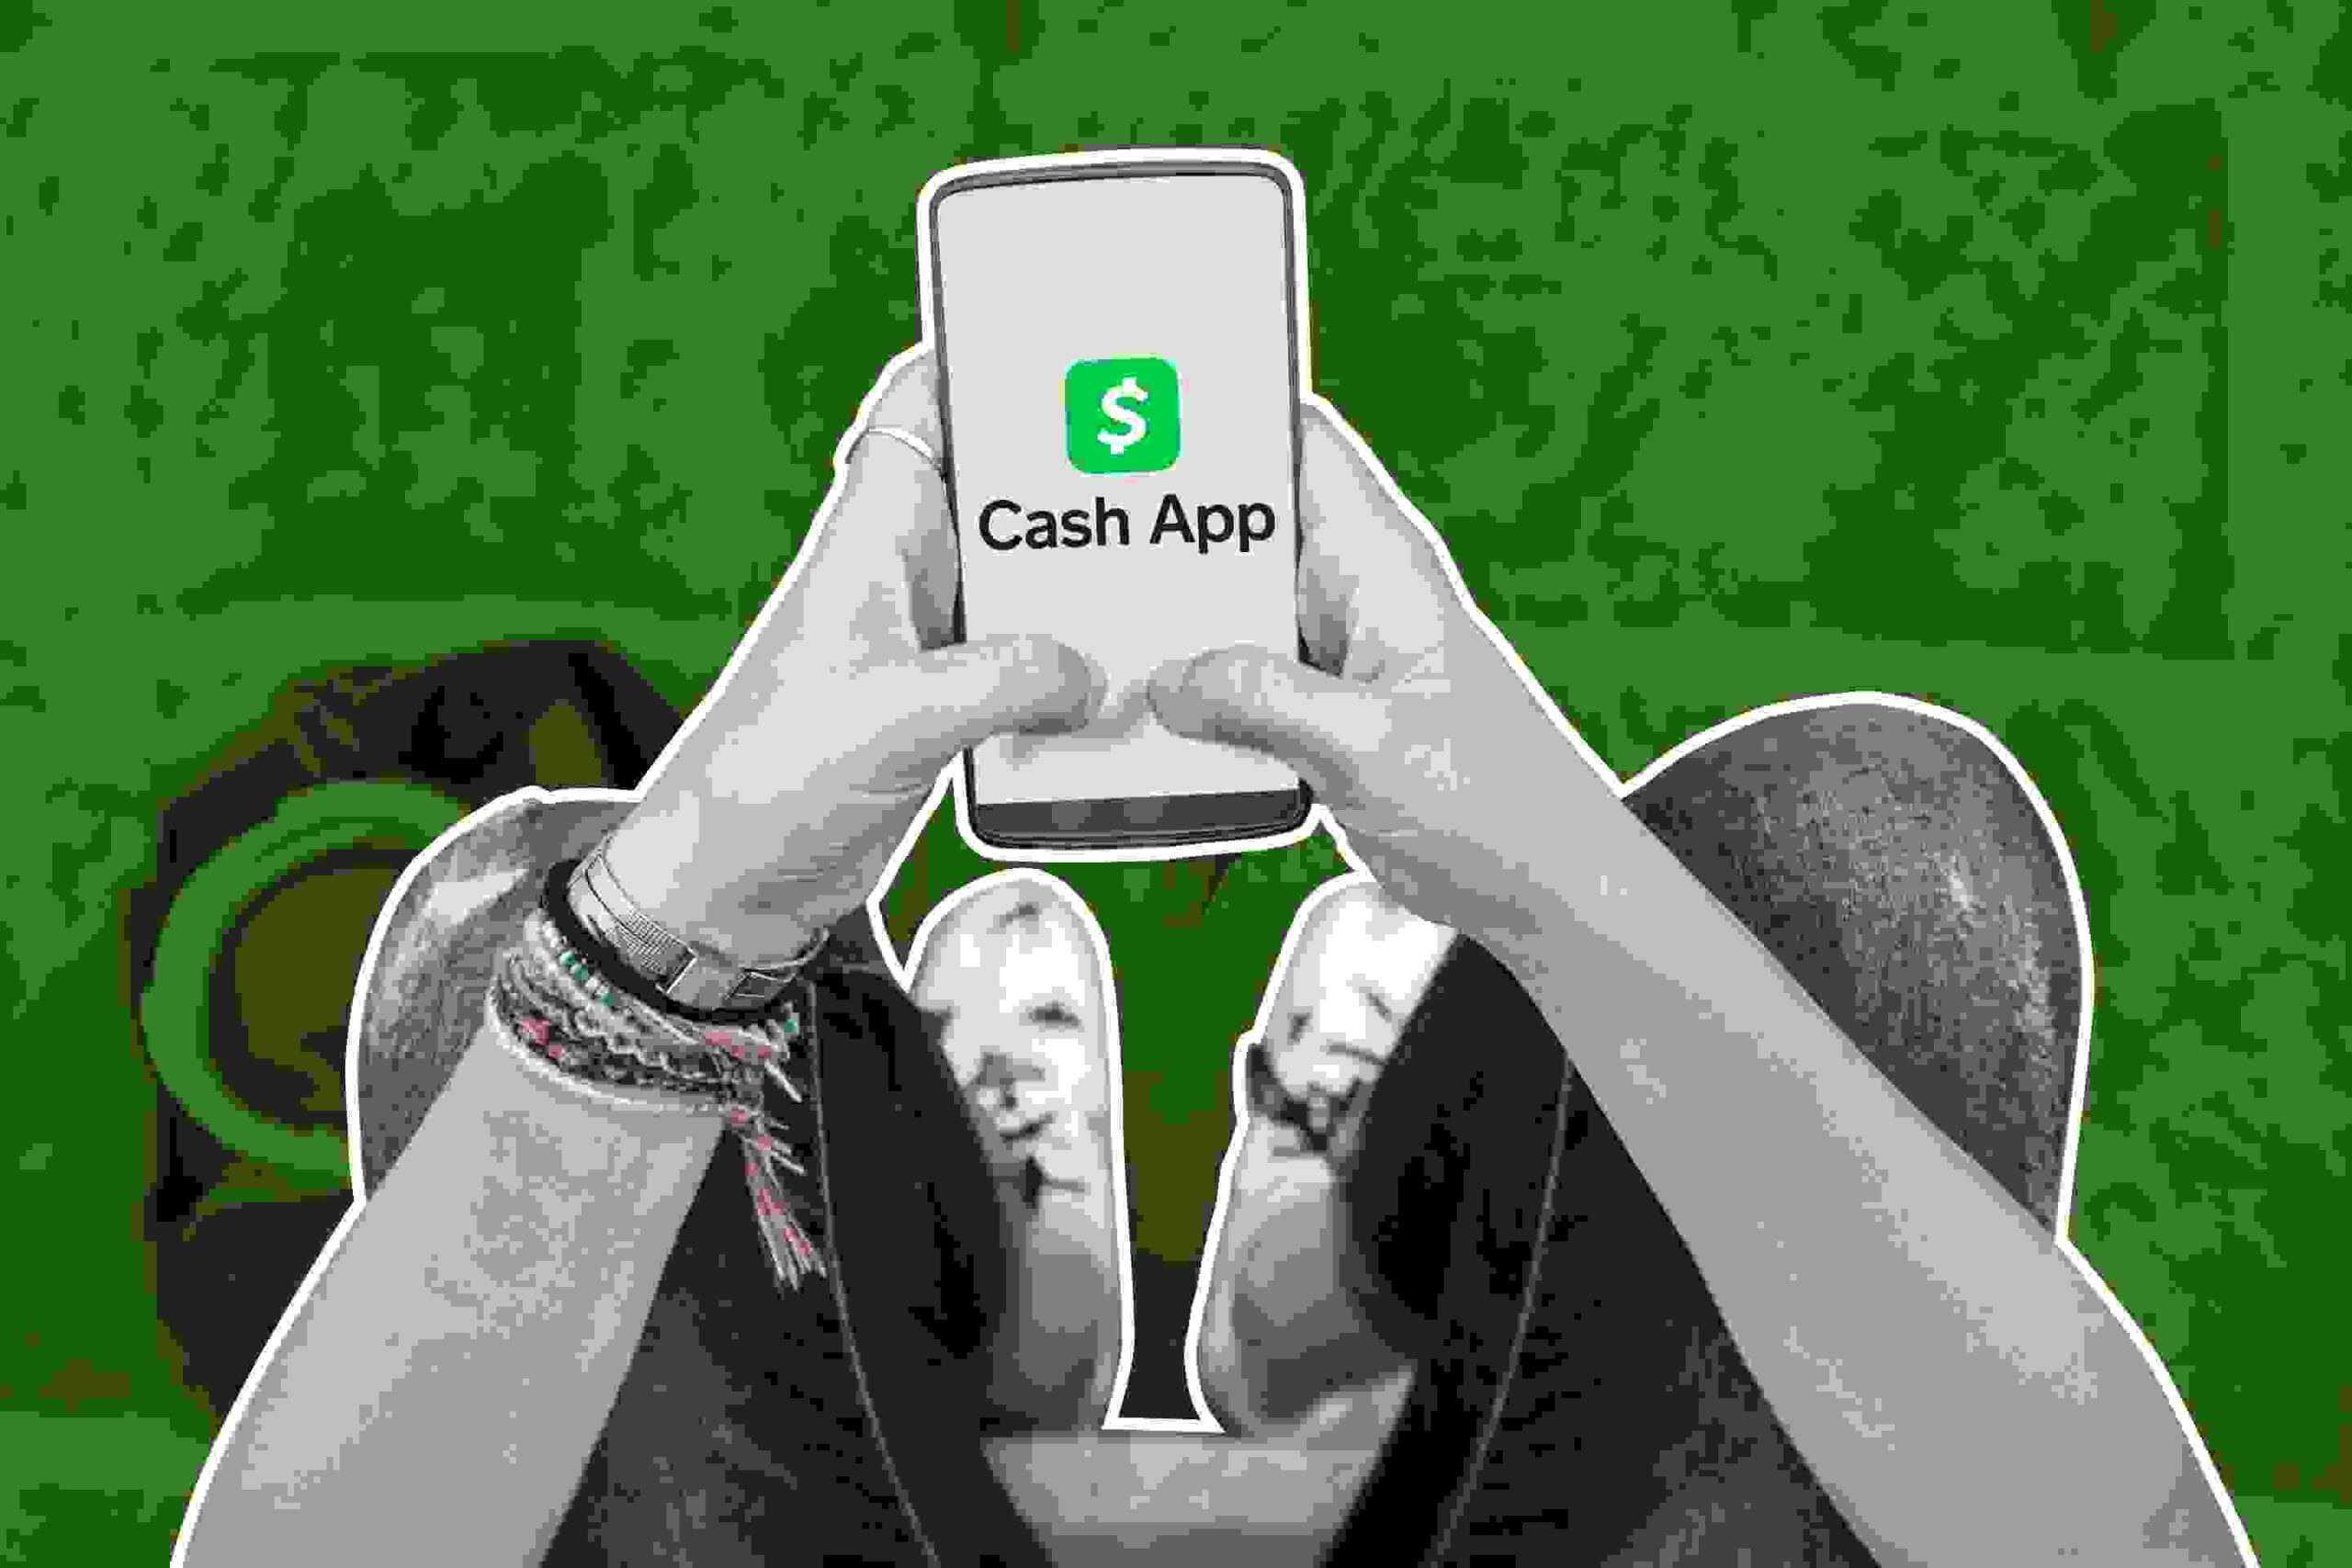 Why is Your Age Important on CashApp?